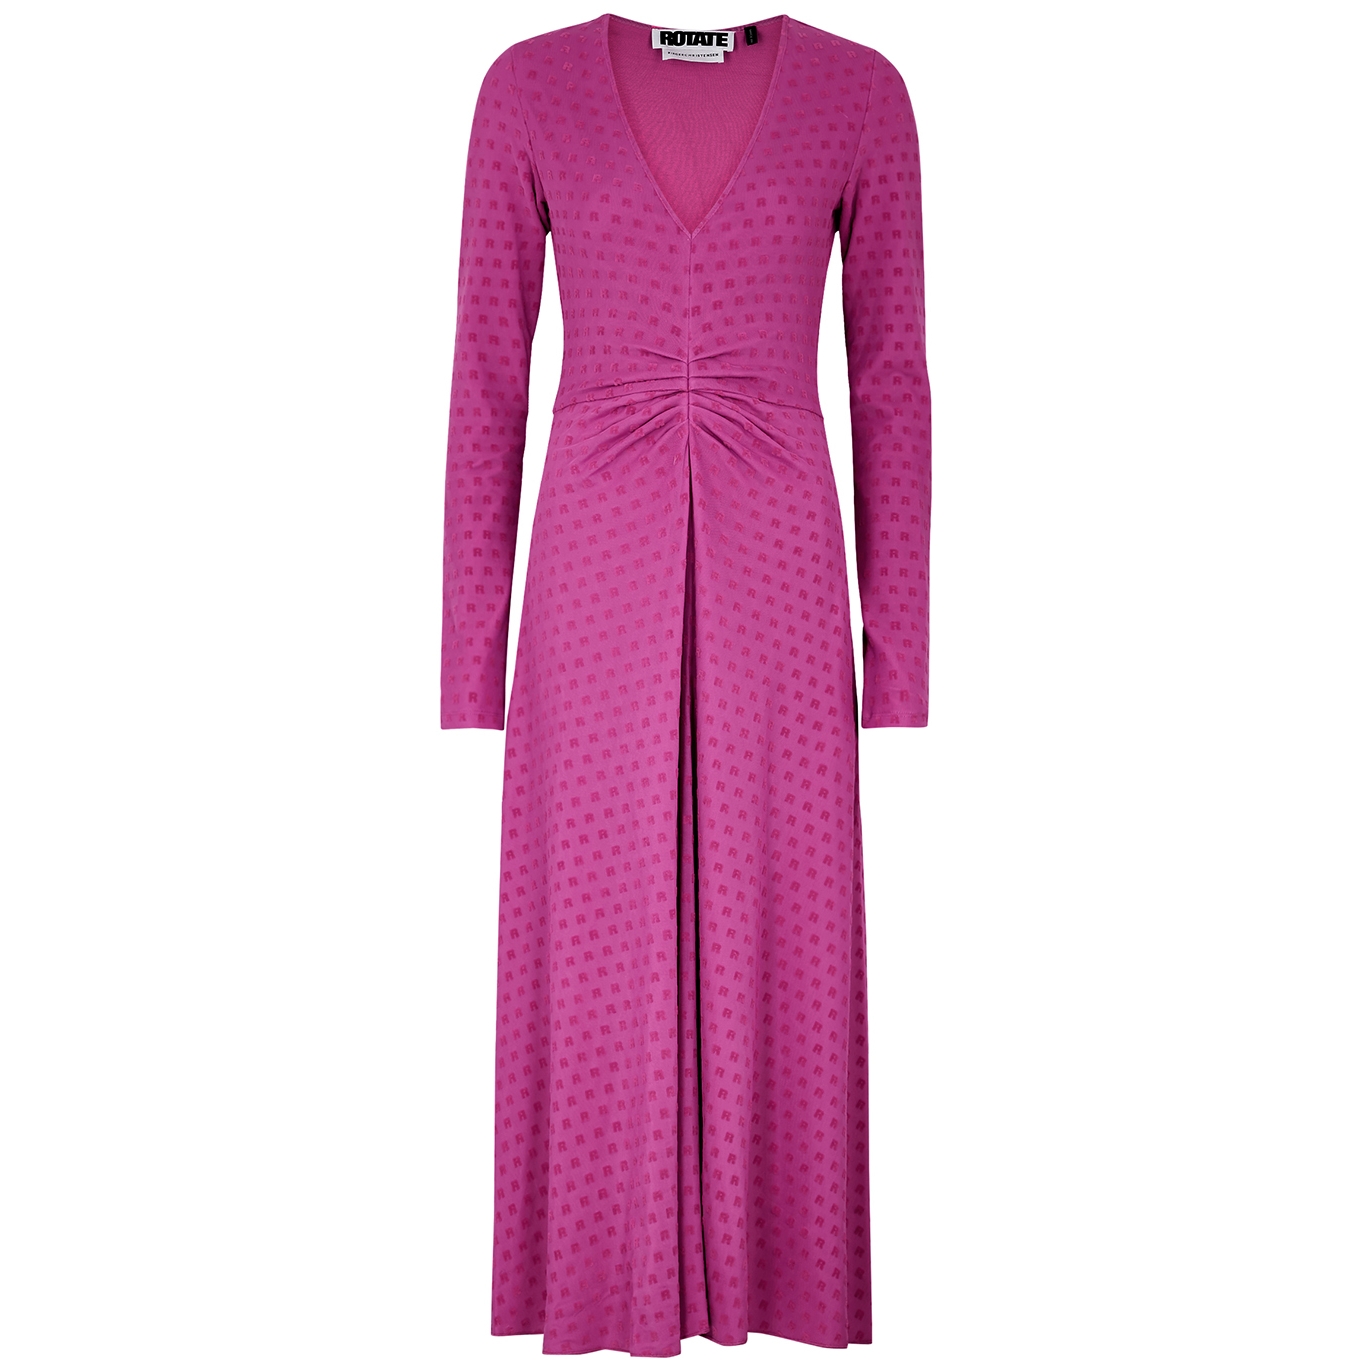 23 Pink Dresses That Are Guaranteed to Make You Smile | Who What Wear UK